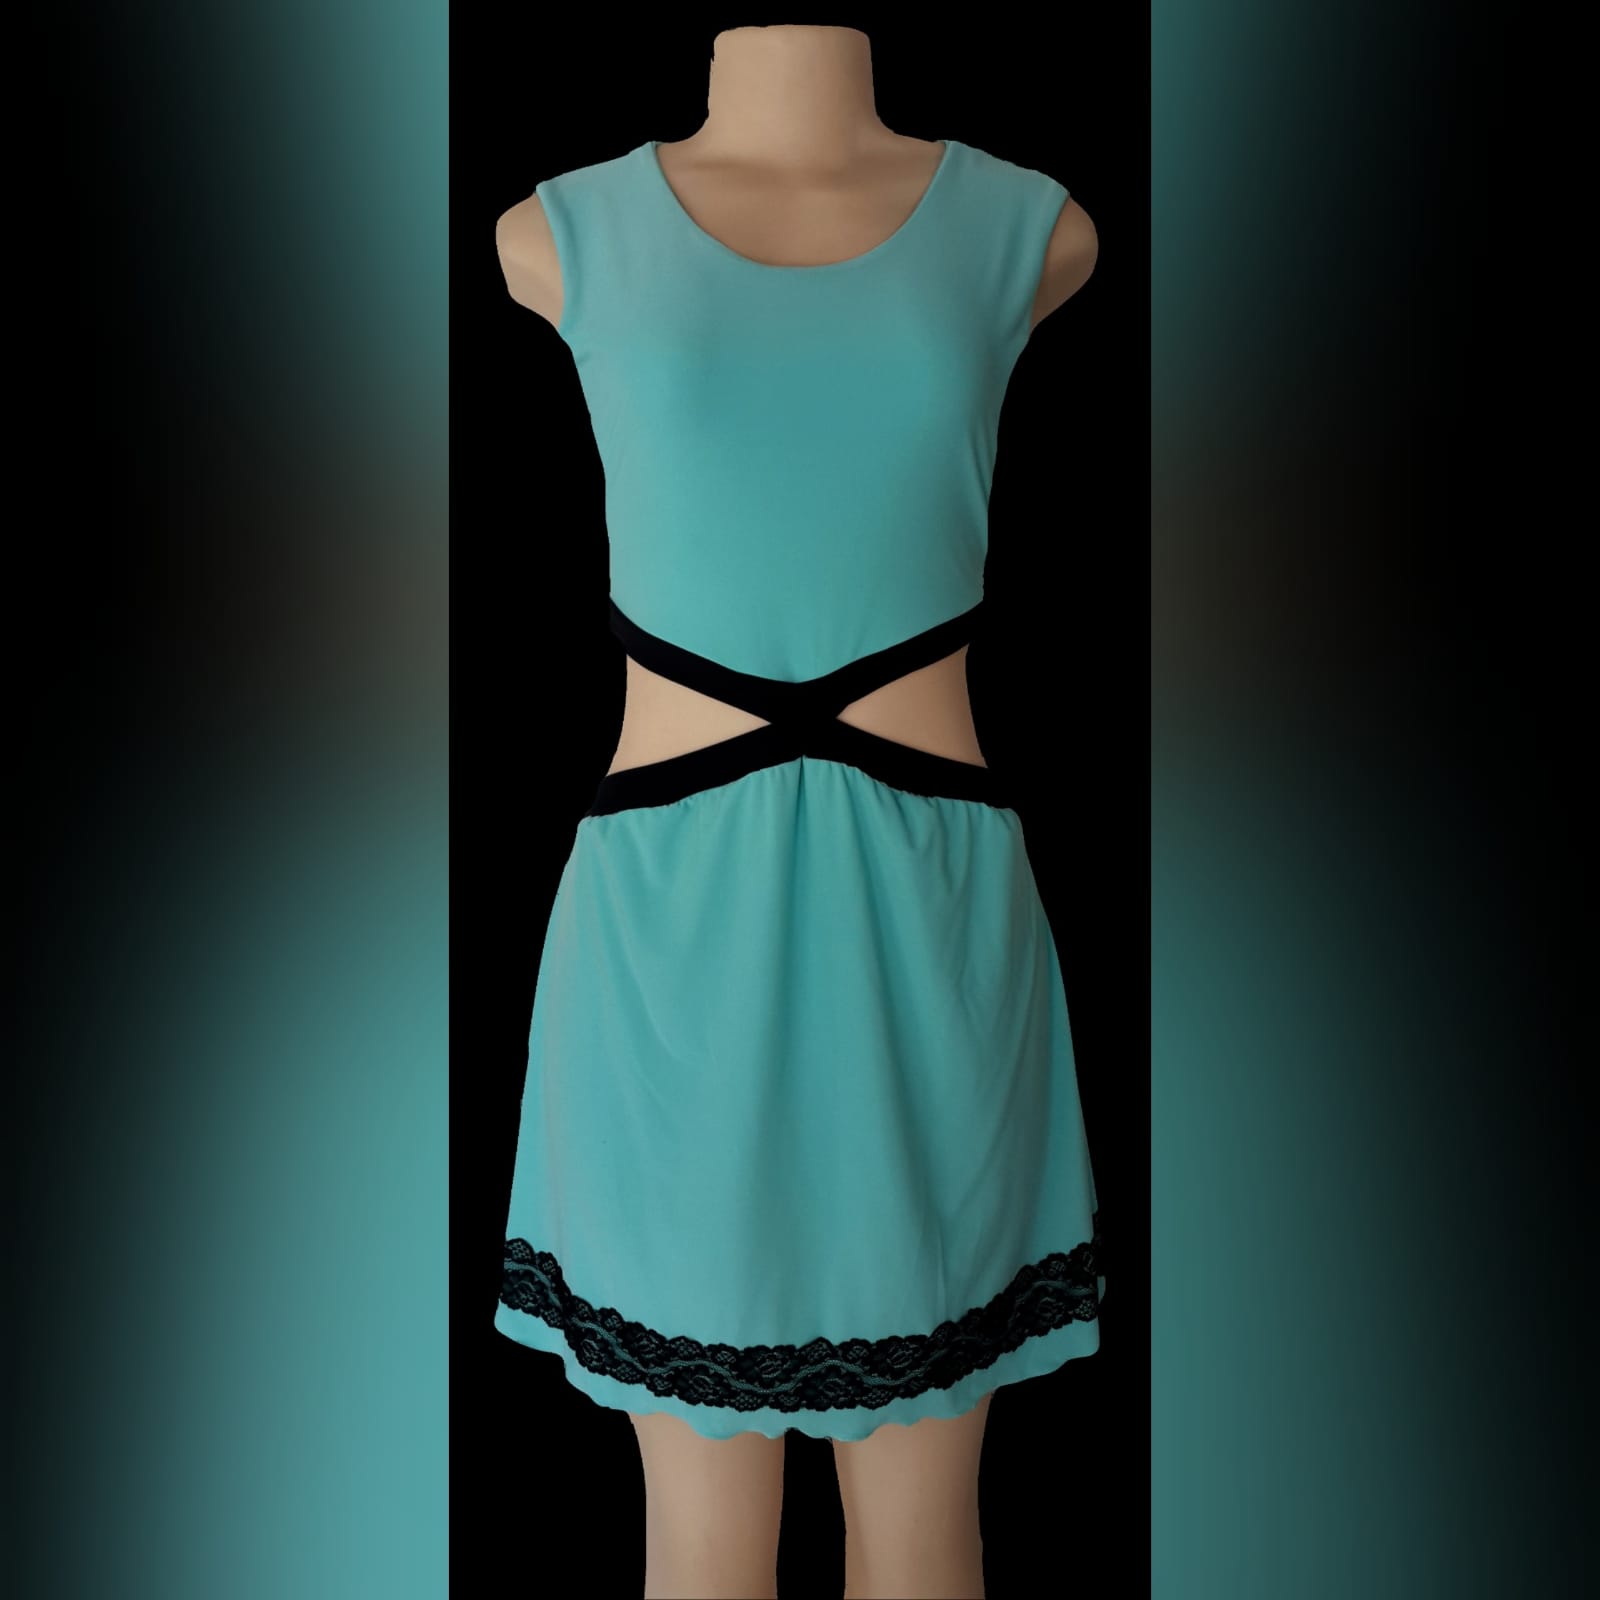 Mint green short smart casual dress 1 mint green short smart casual dress, open side tummy detailed with black and a lace border